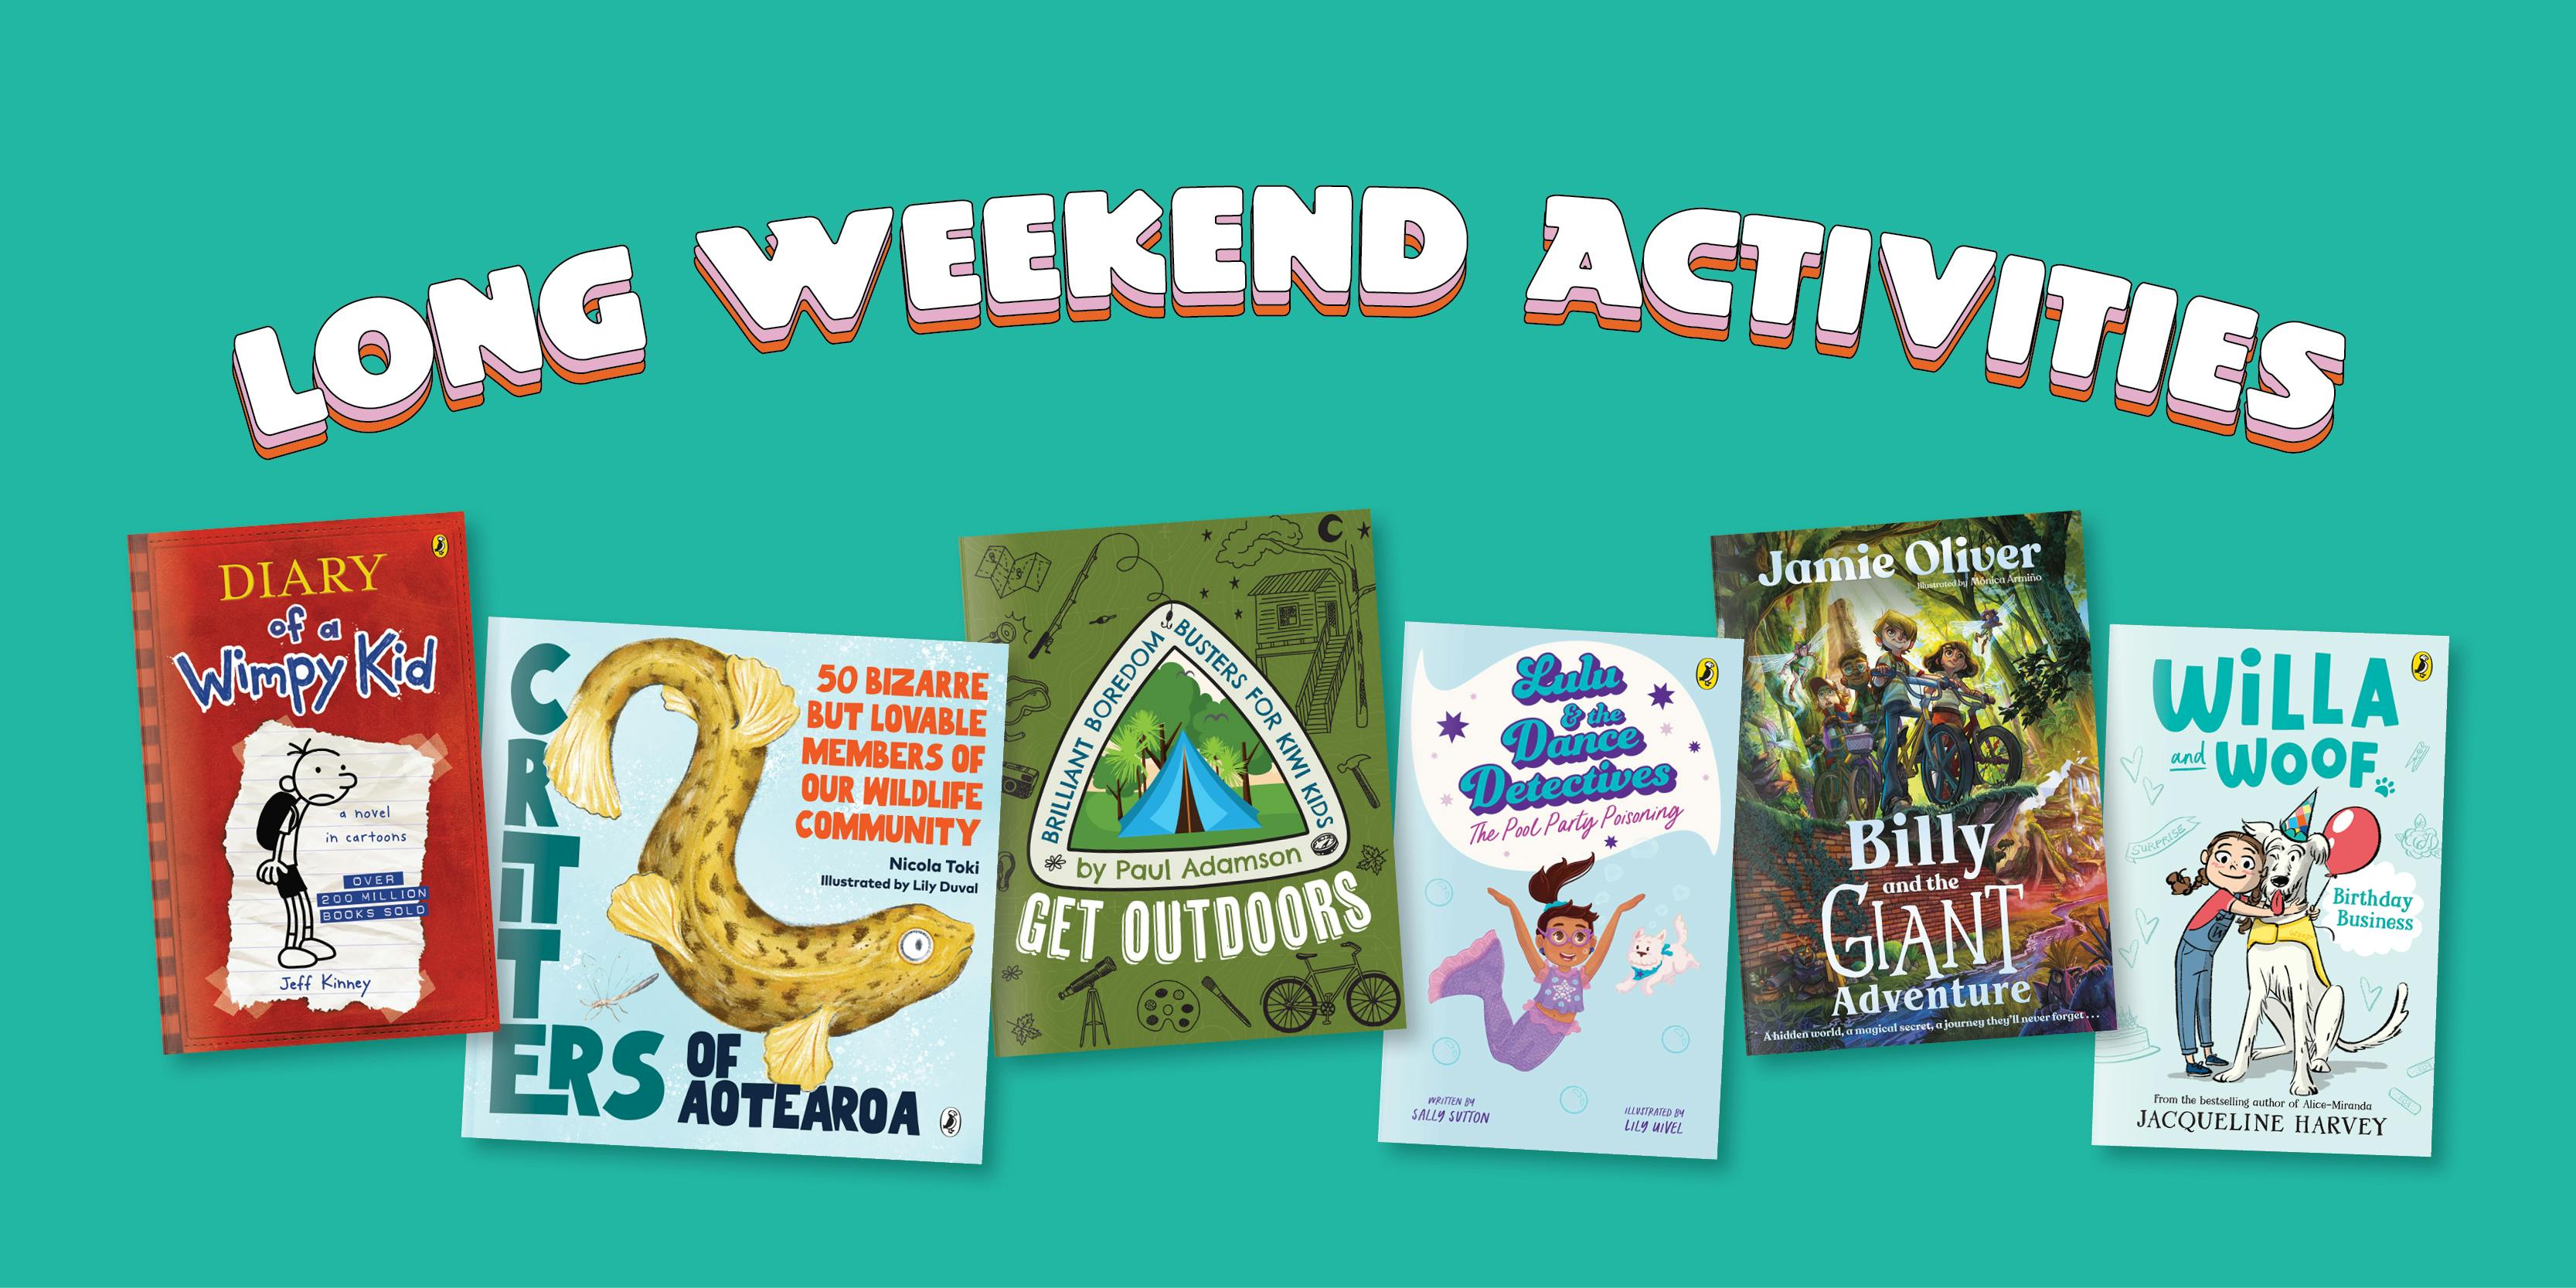 Keep entertained this long weekend!